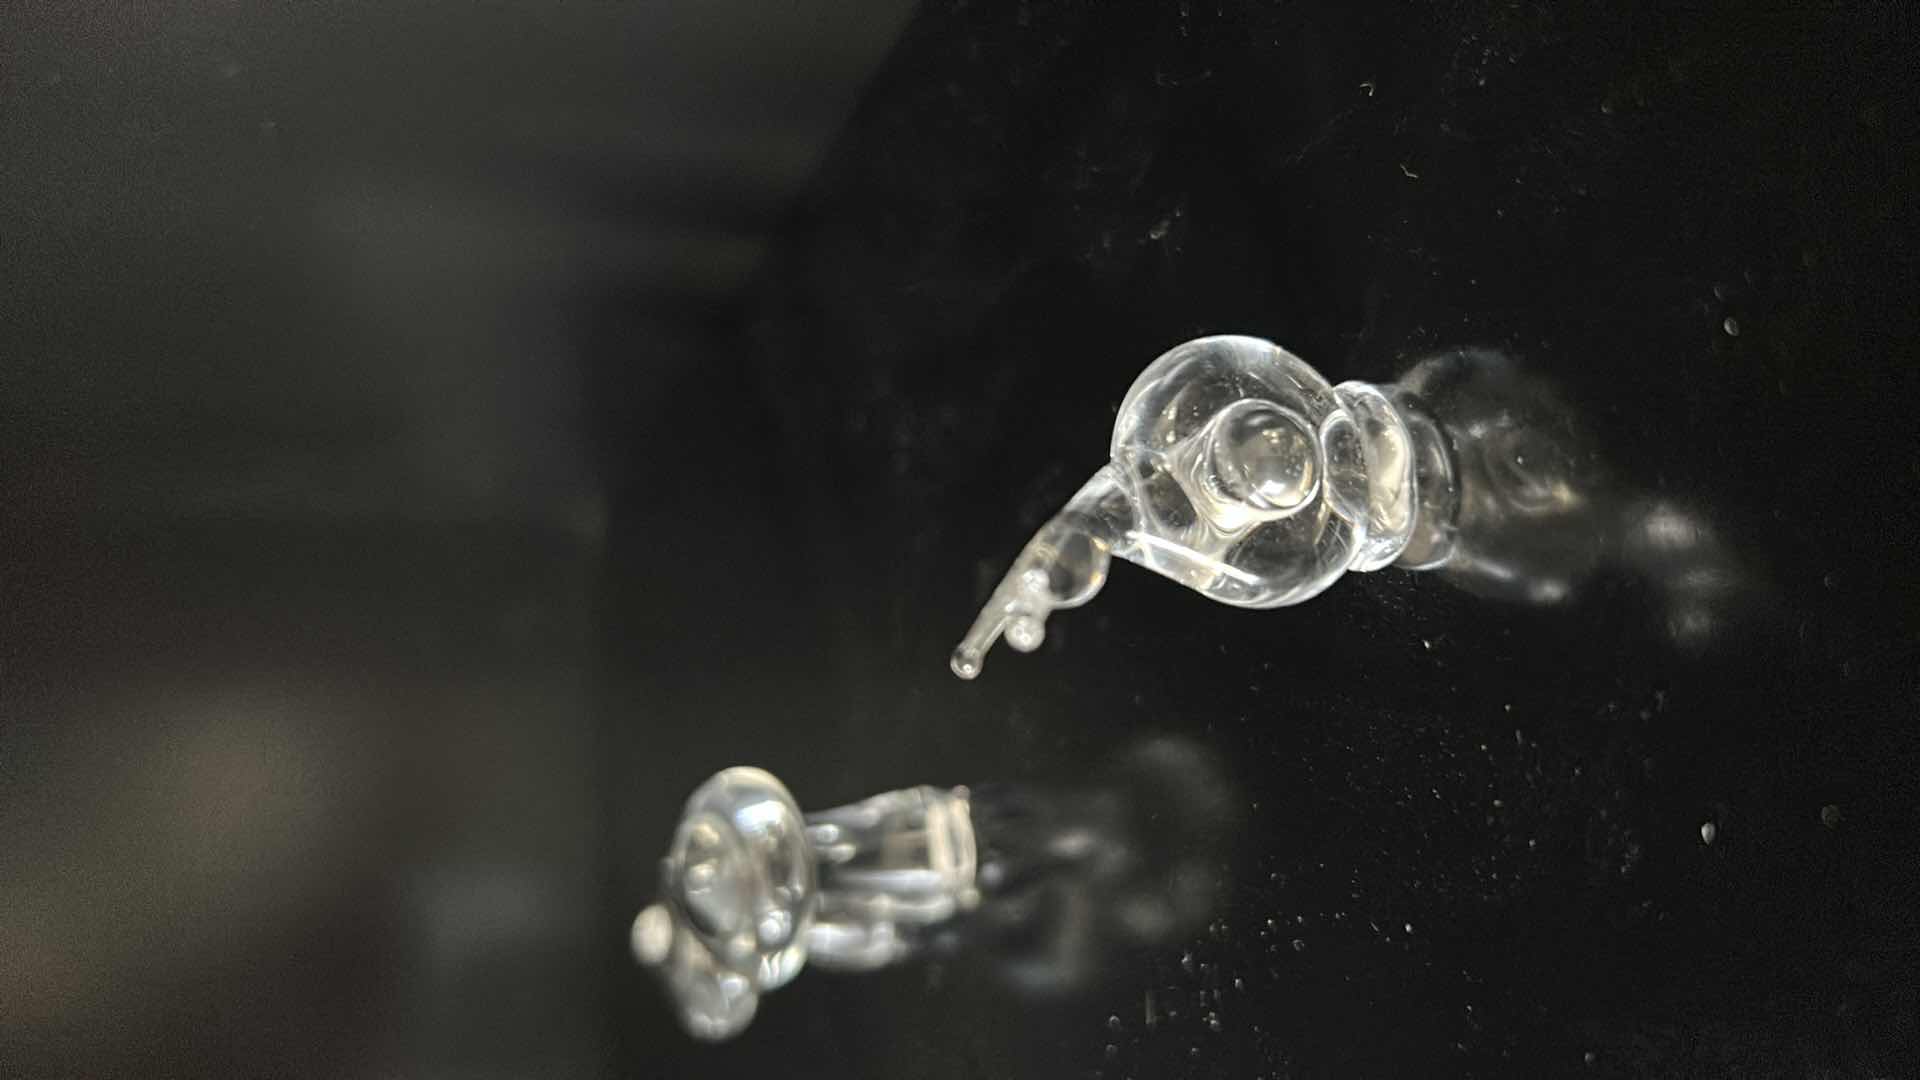 Photo 6 of HAND BLOWN GLASS FIGURINES SNAILS AND MUSHROOMS TALLEST 3.5”